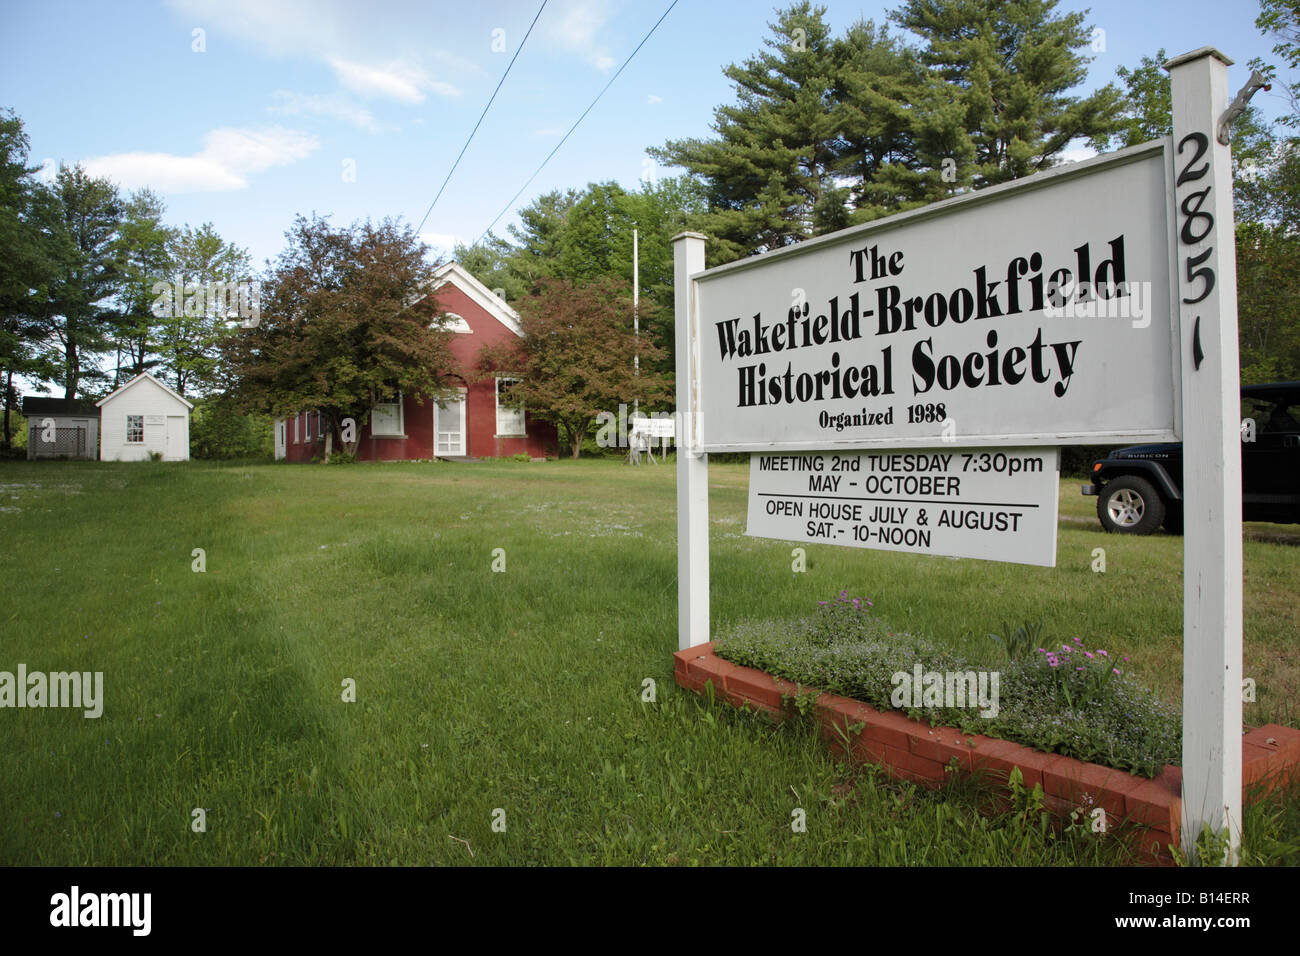 Wakefield Brookfield Historical Society building Located in Wakefield New Hampshire USA which is part of scenic New England Stock Photo